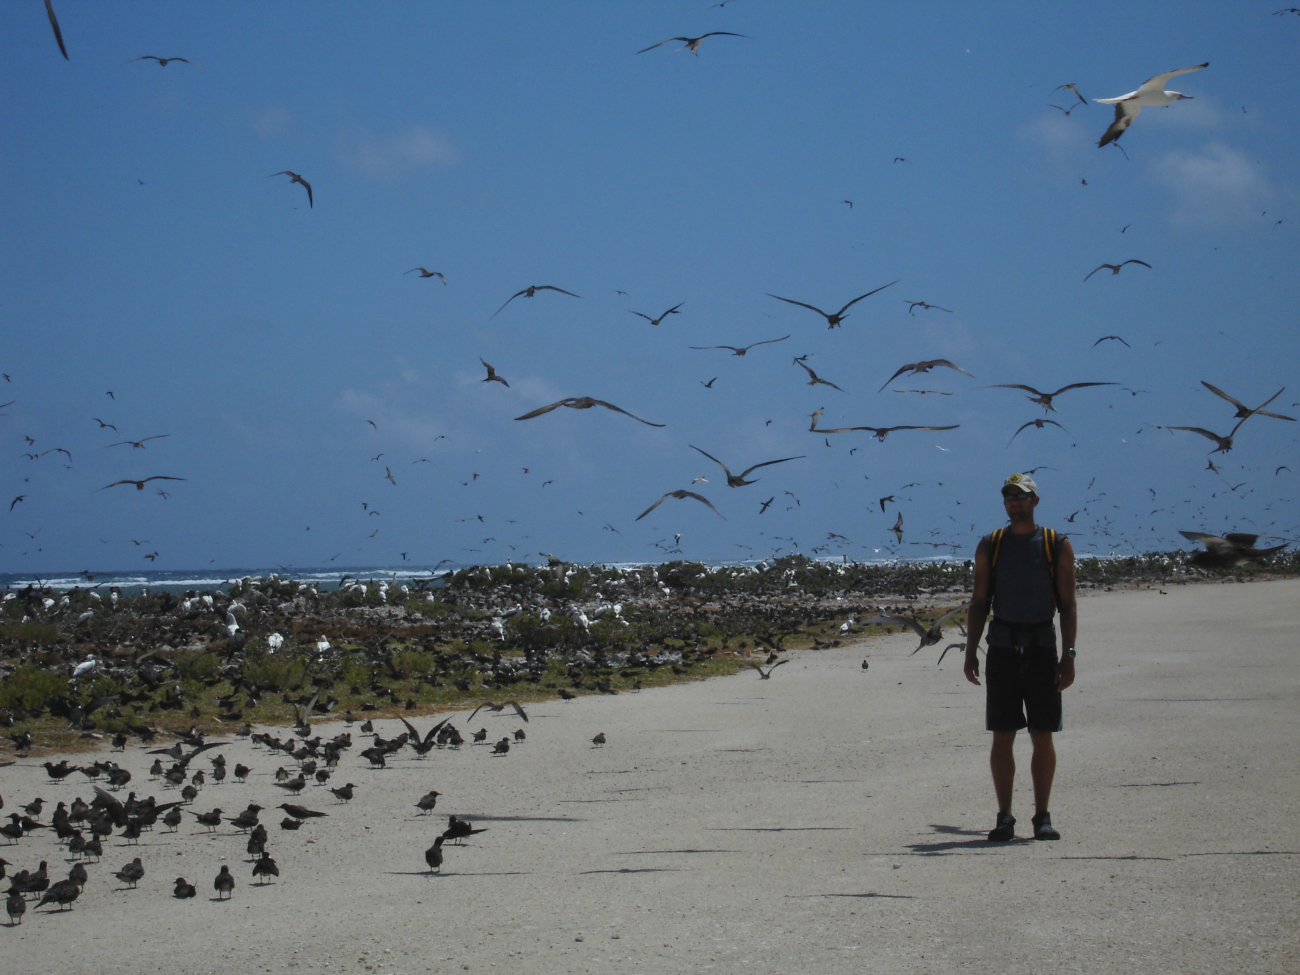 A different species shows up amidst the sea birds of Tern Island